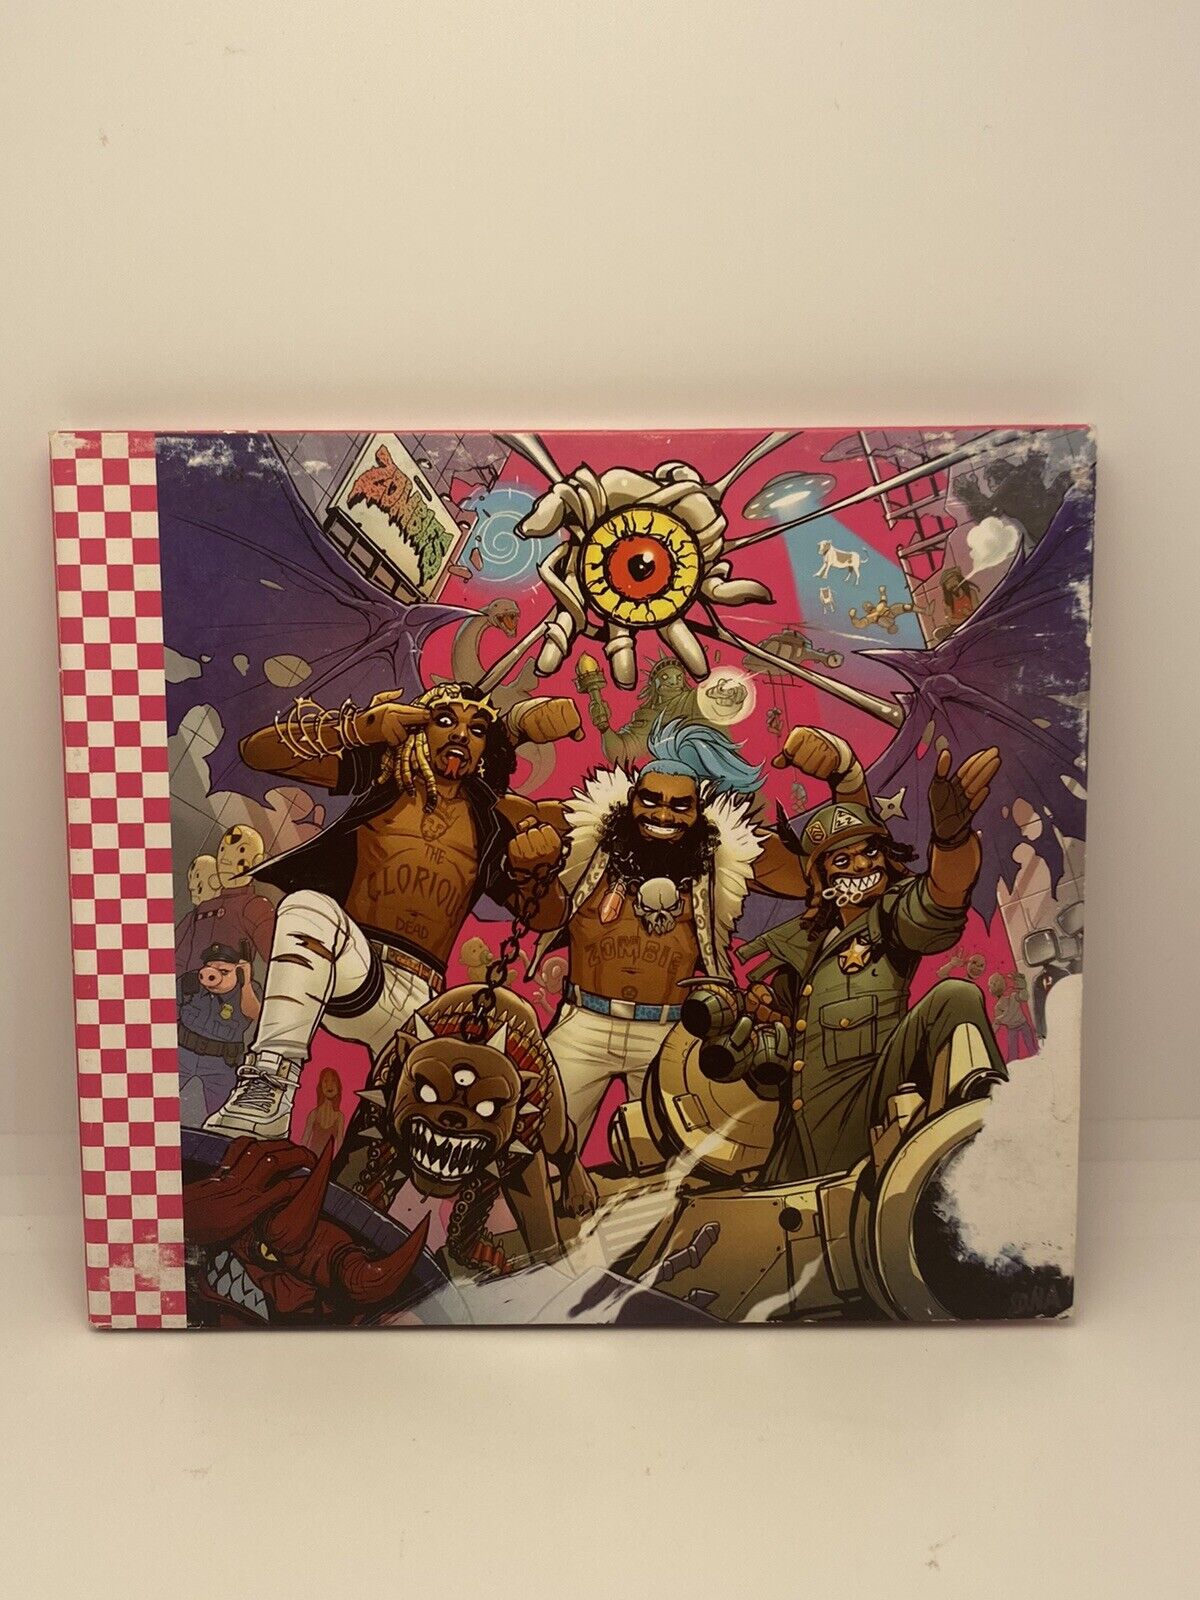 3001: A Laced Odyssey by Flatbush Zombies (CD, 2016)